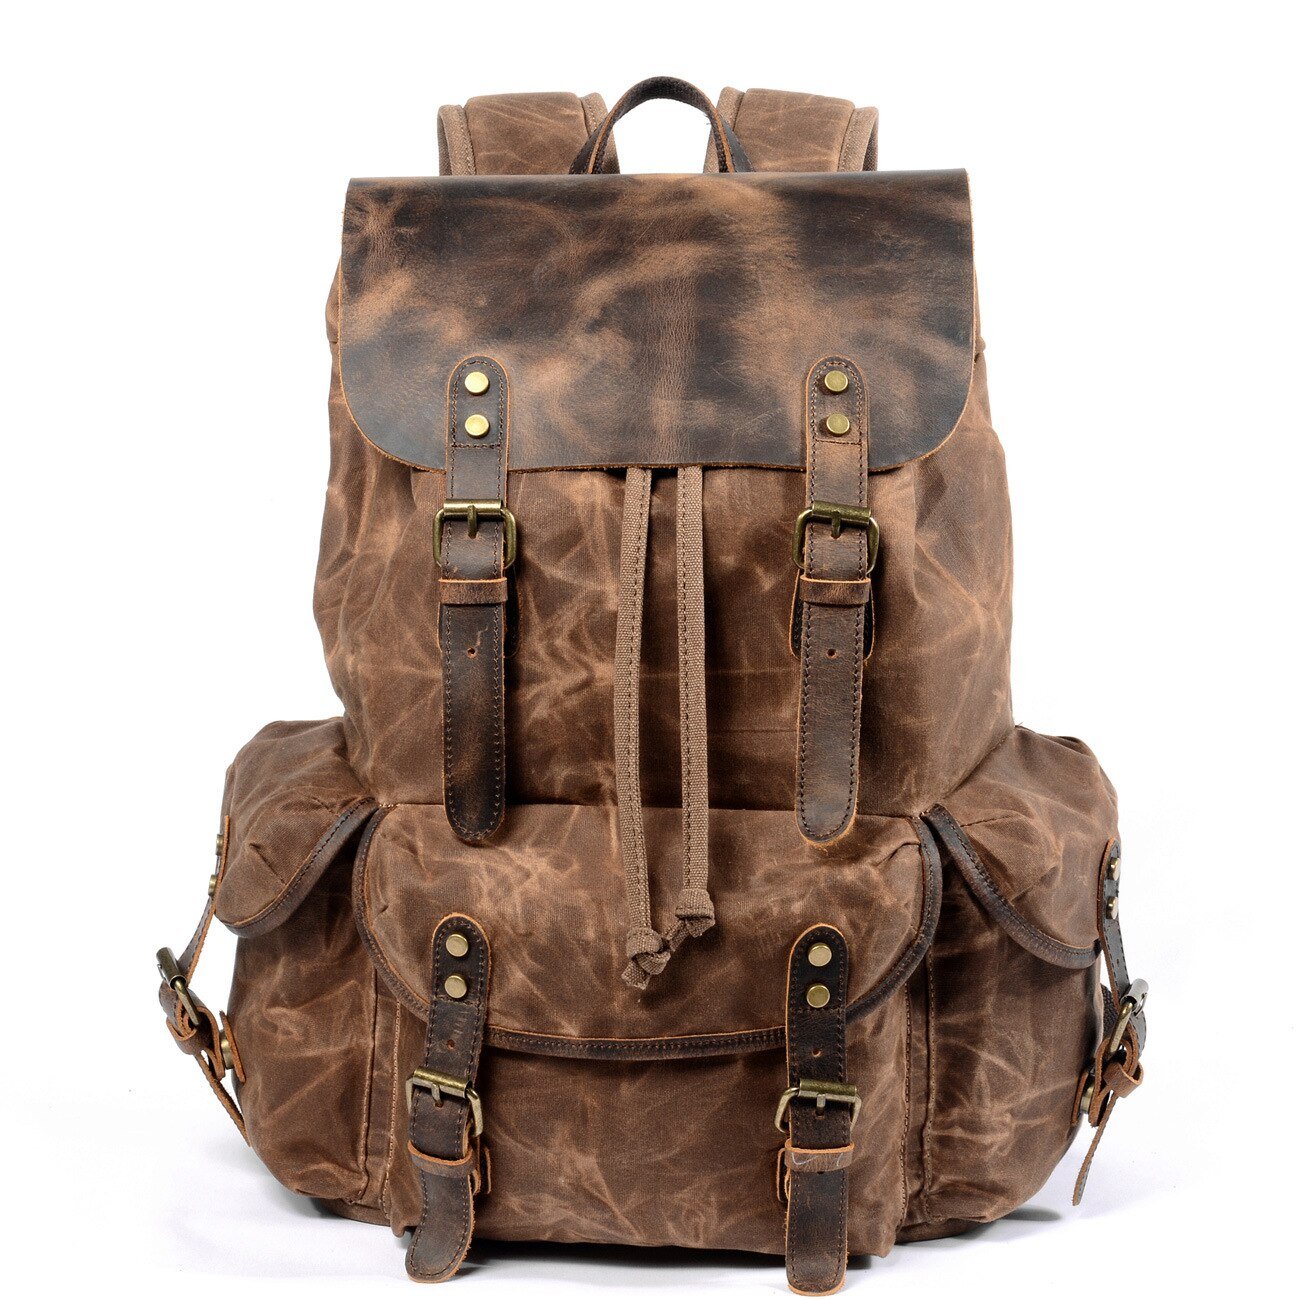 Men’s Oil Wax Canvas Bag Computer Bag School Bag Student Backpack Retro Backpack Drawstring Travel Backpack Male Outdoor Male